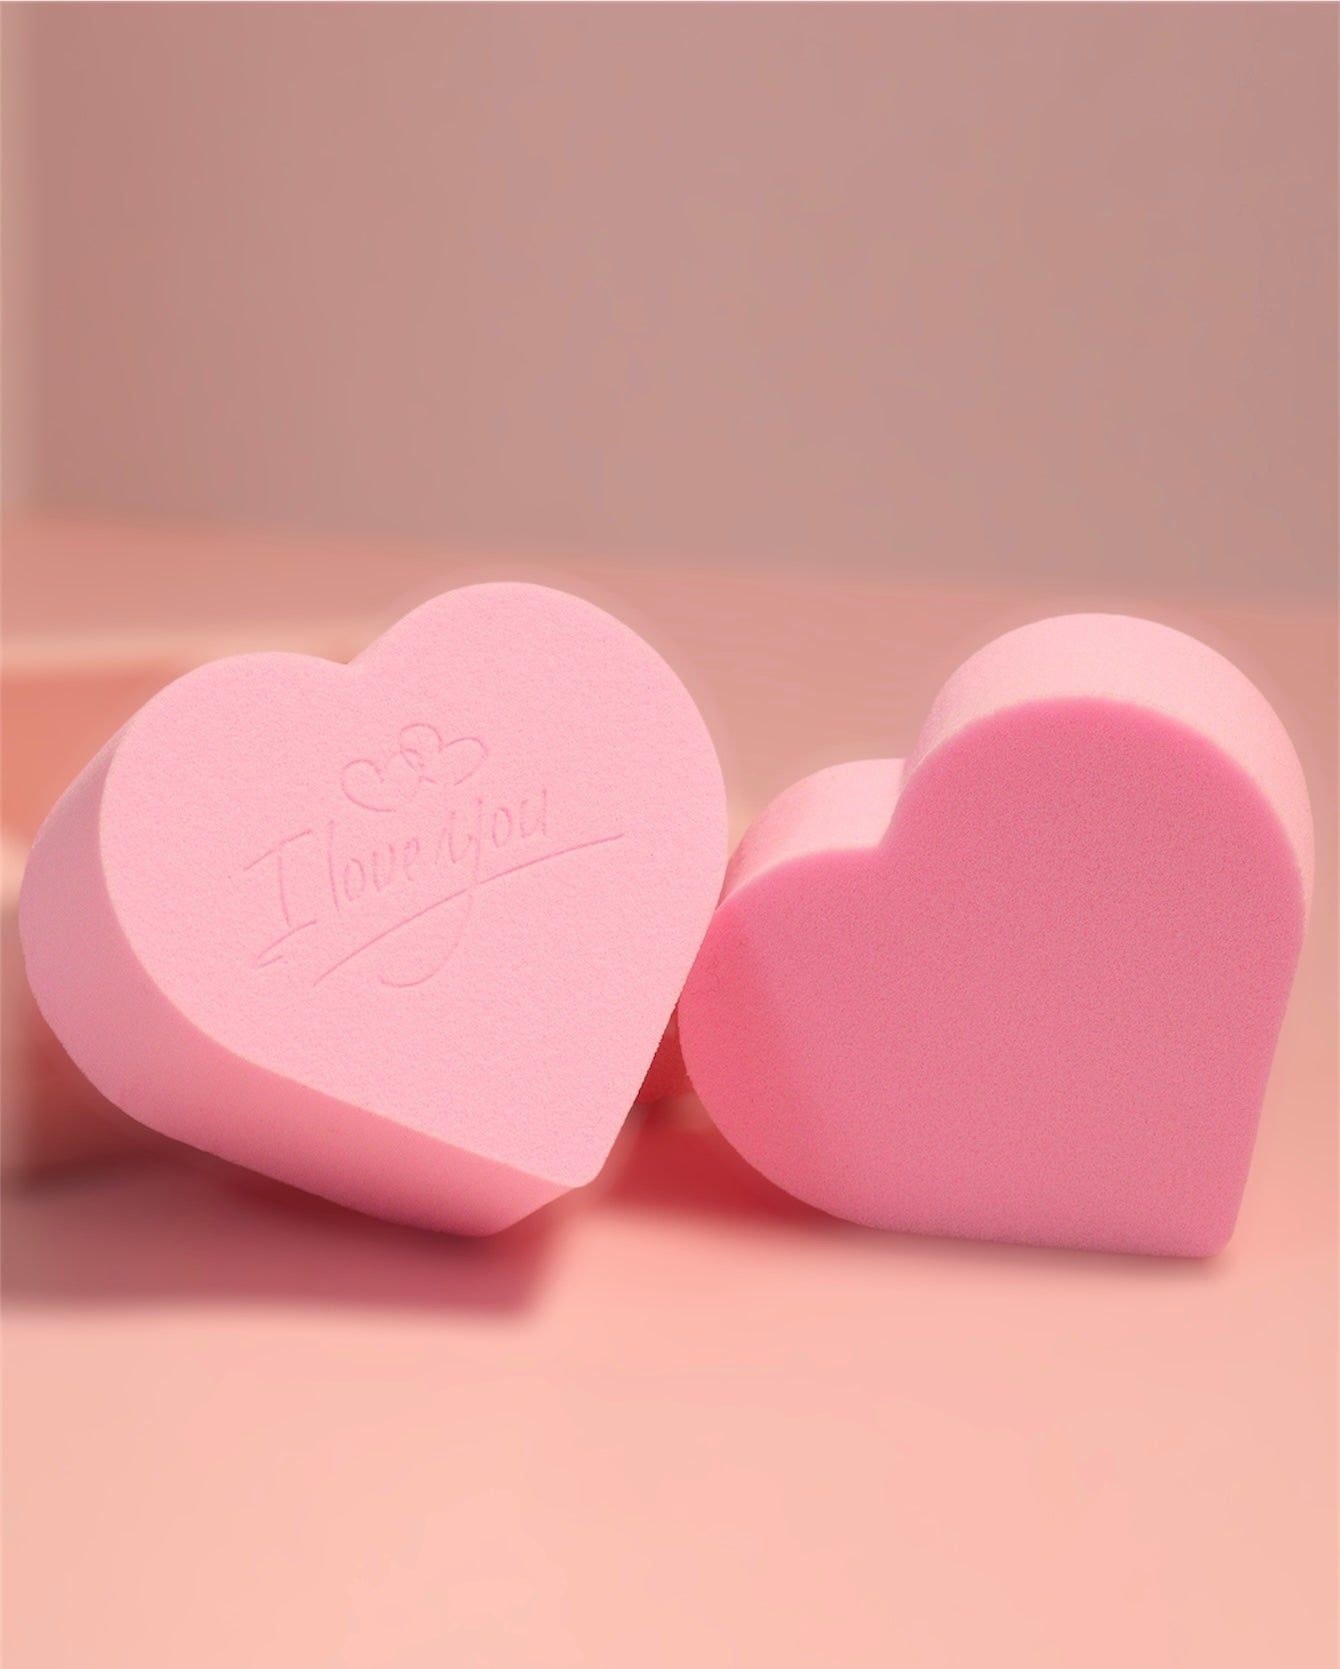 The Princess Collection Set Of Two Heart Shaped Beauty Blenders